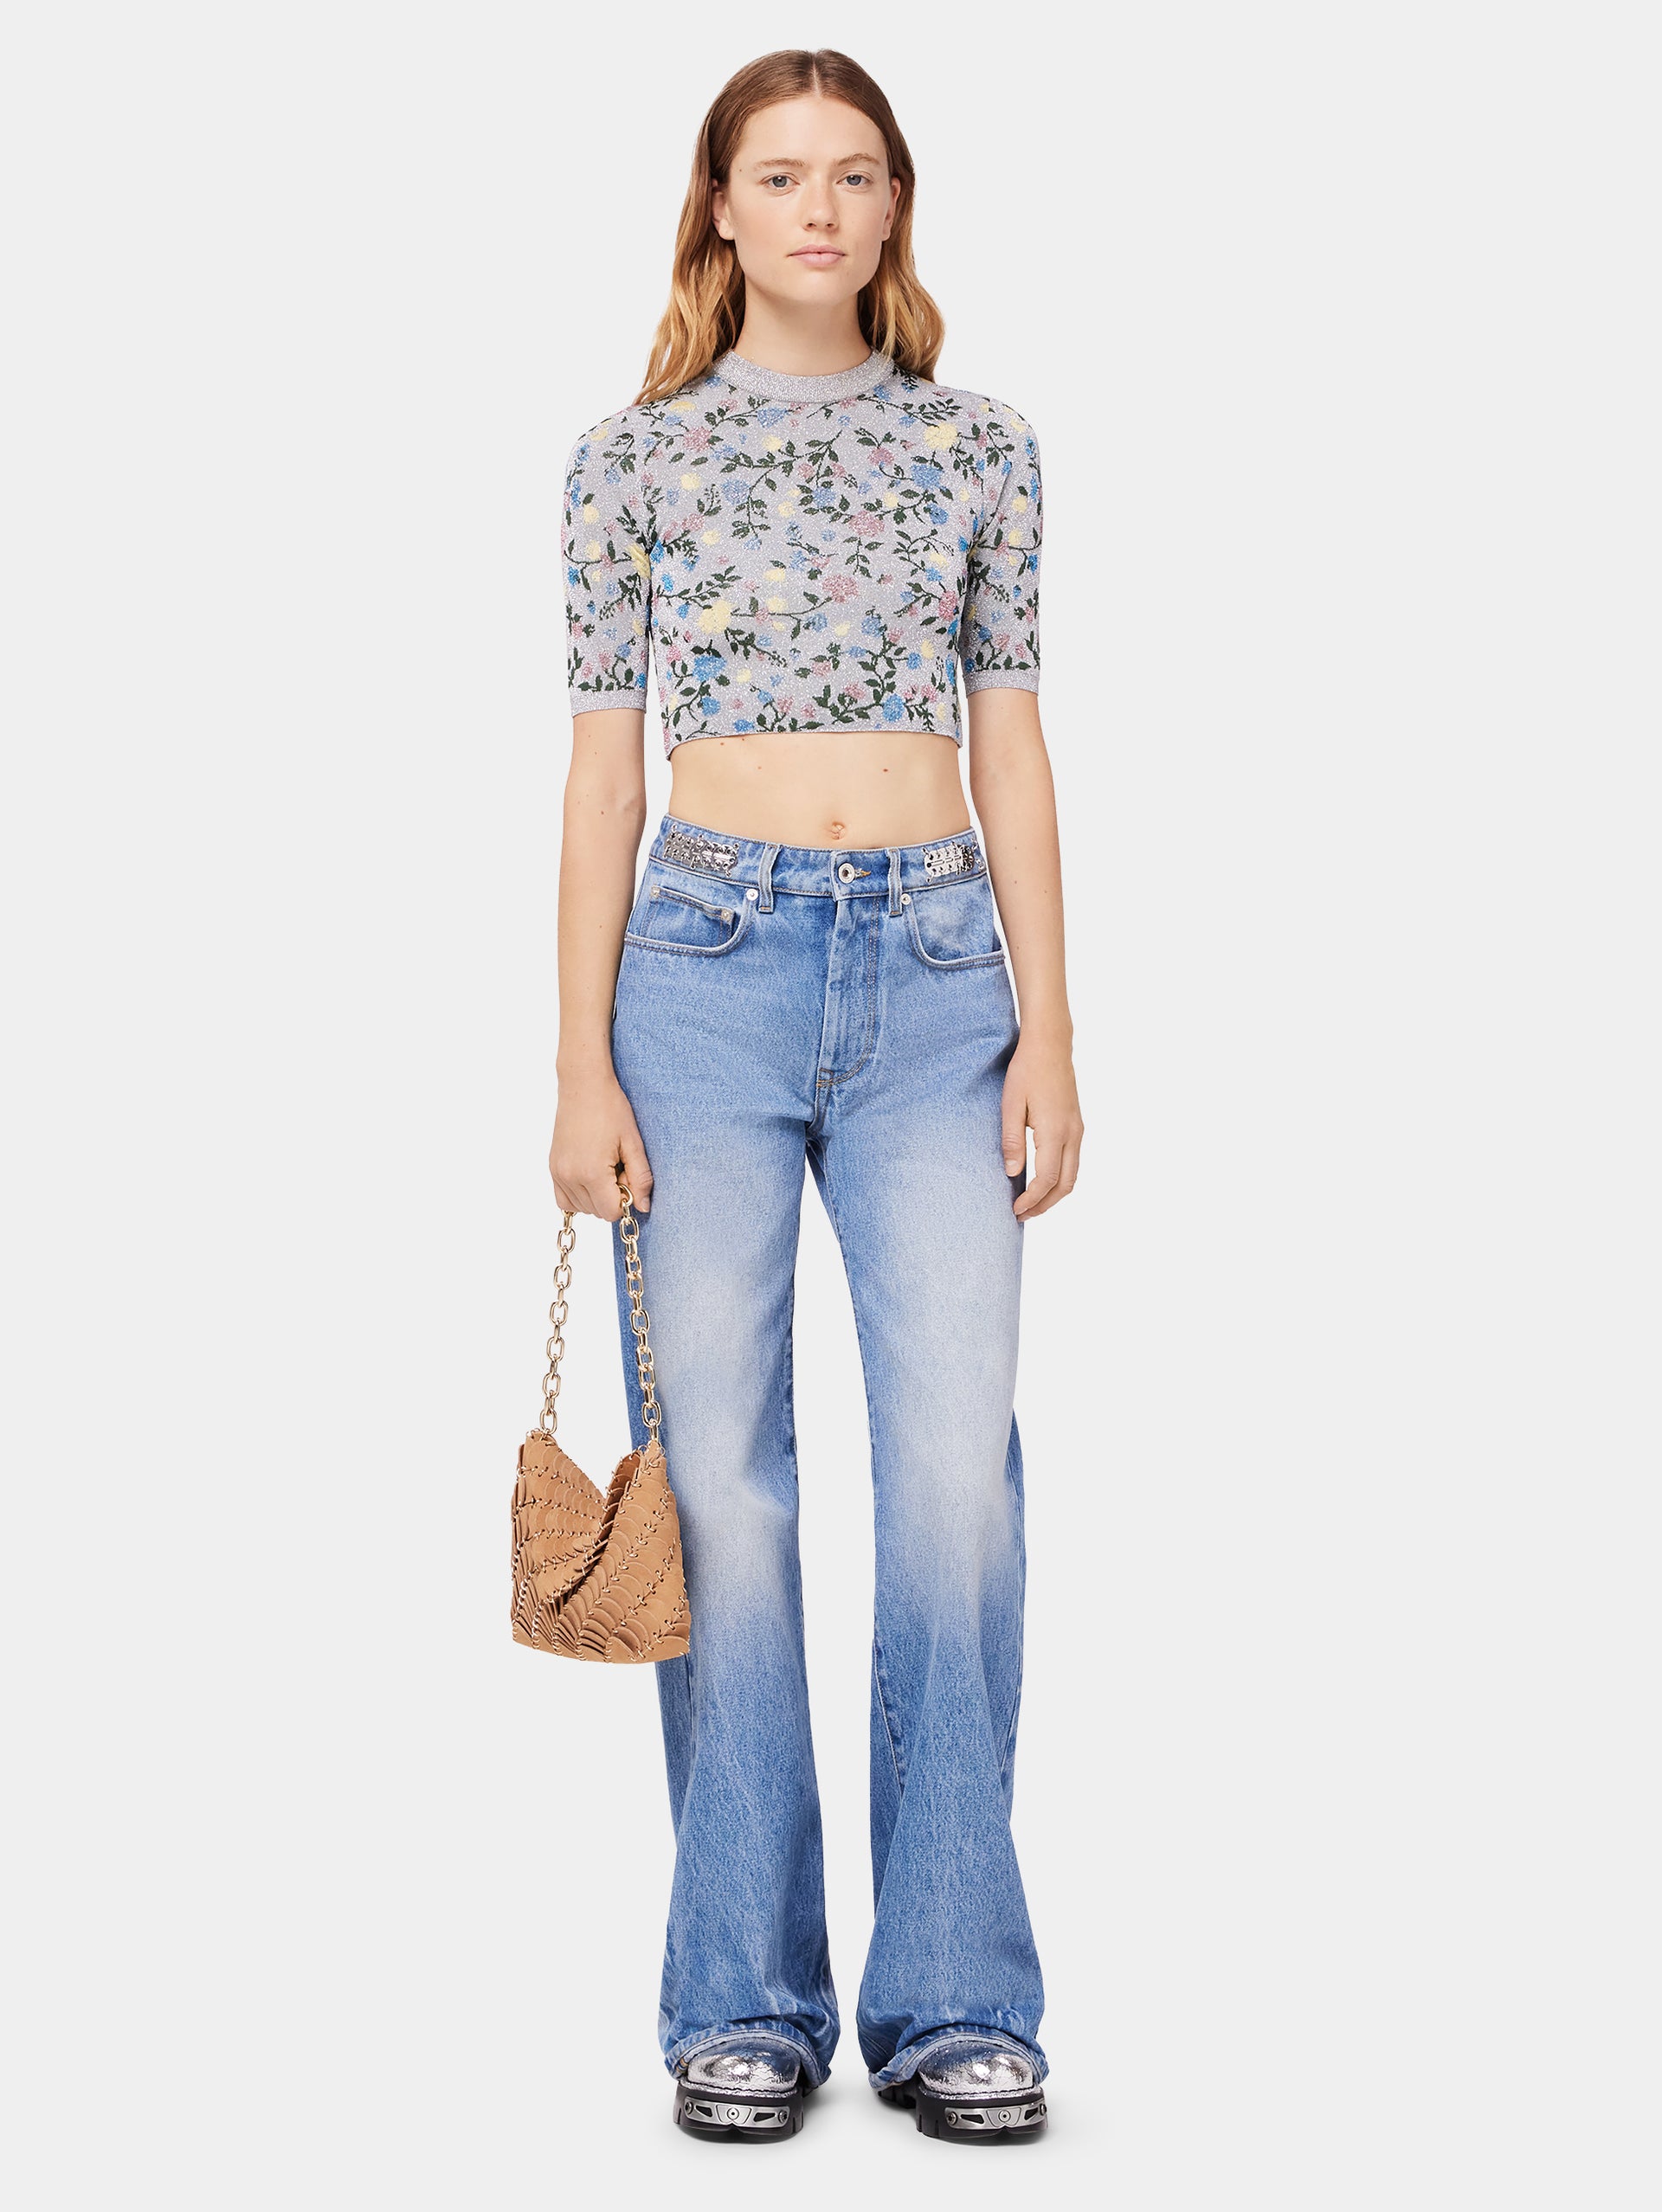 Flared jeans embellished with 1969 discs